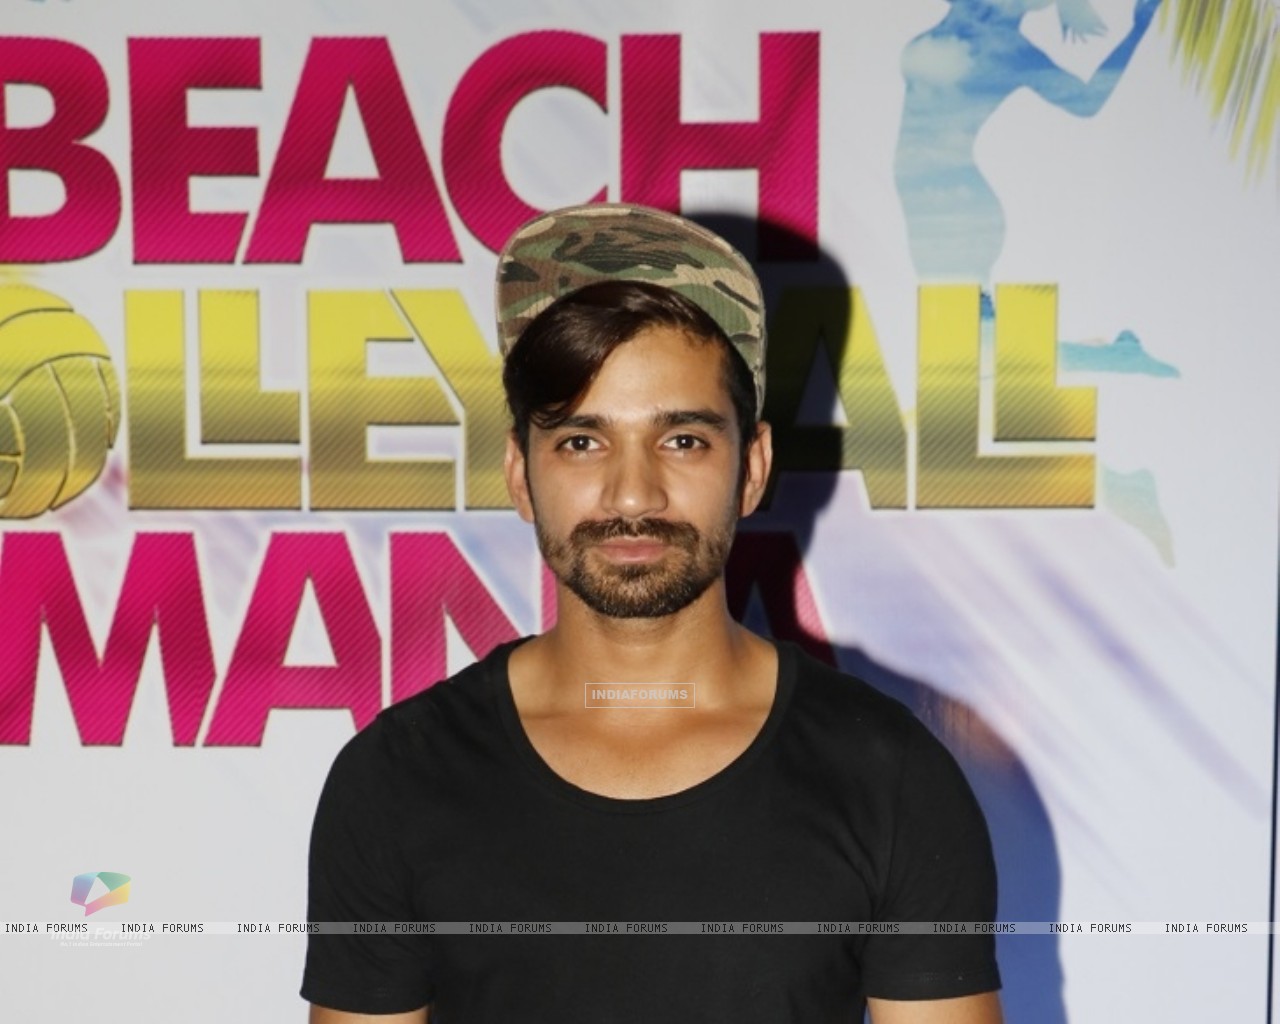 Vishal Singh At Beach Volley Ball Mania Size - Magazine , HD Wallpaper & Backgrounds